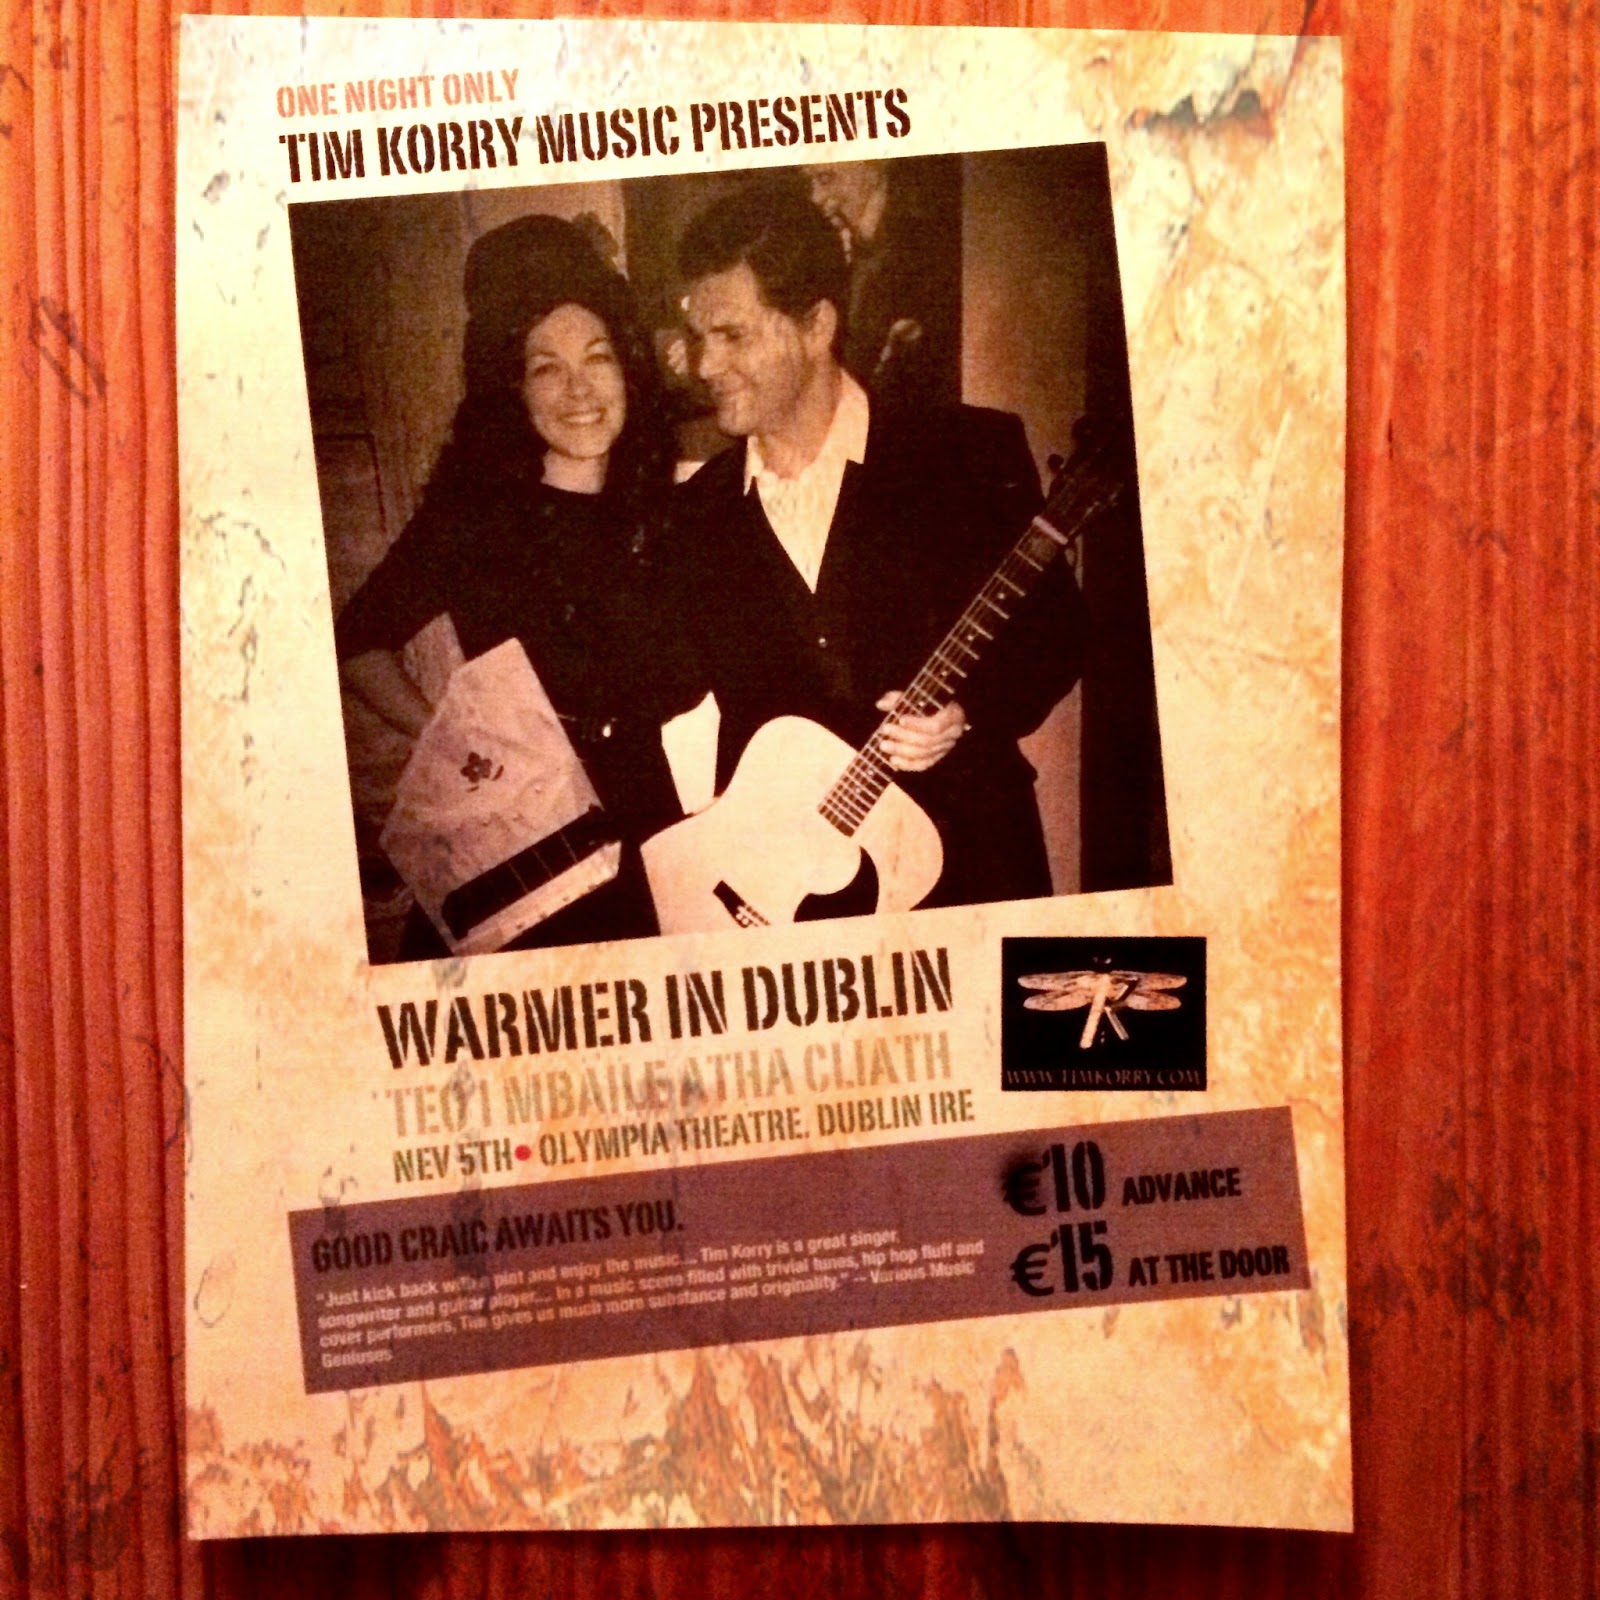 http://timkorry.bandcamp.com/track/warmer-in-dublin